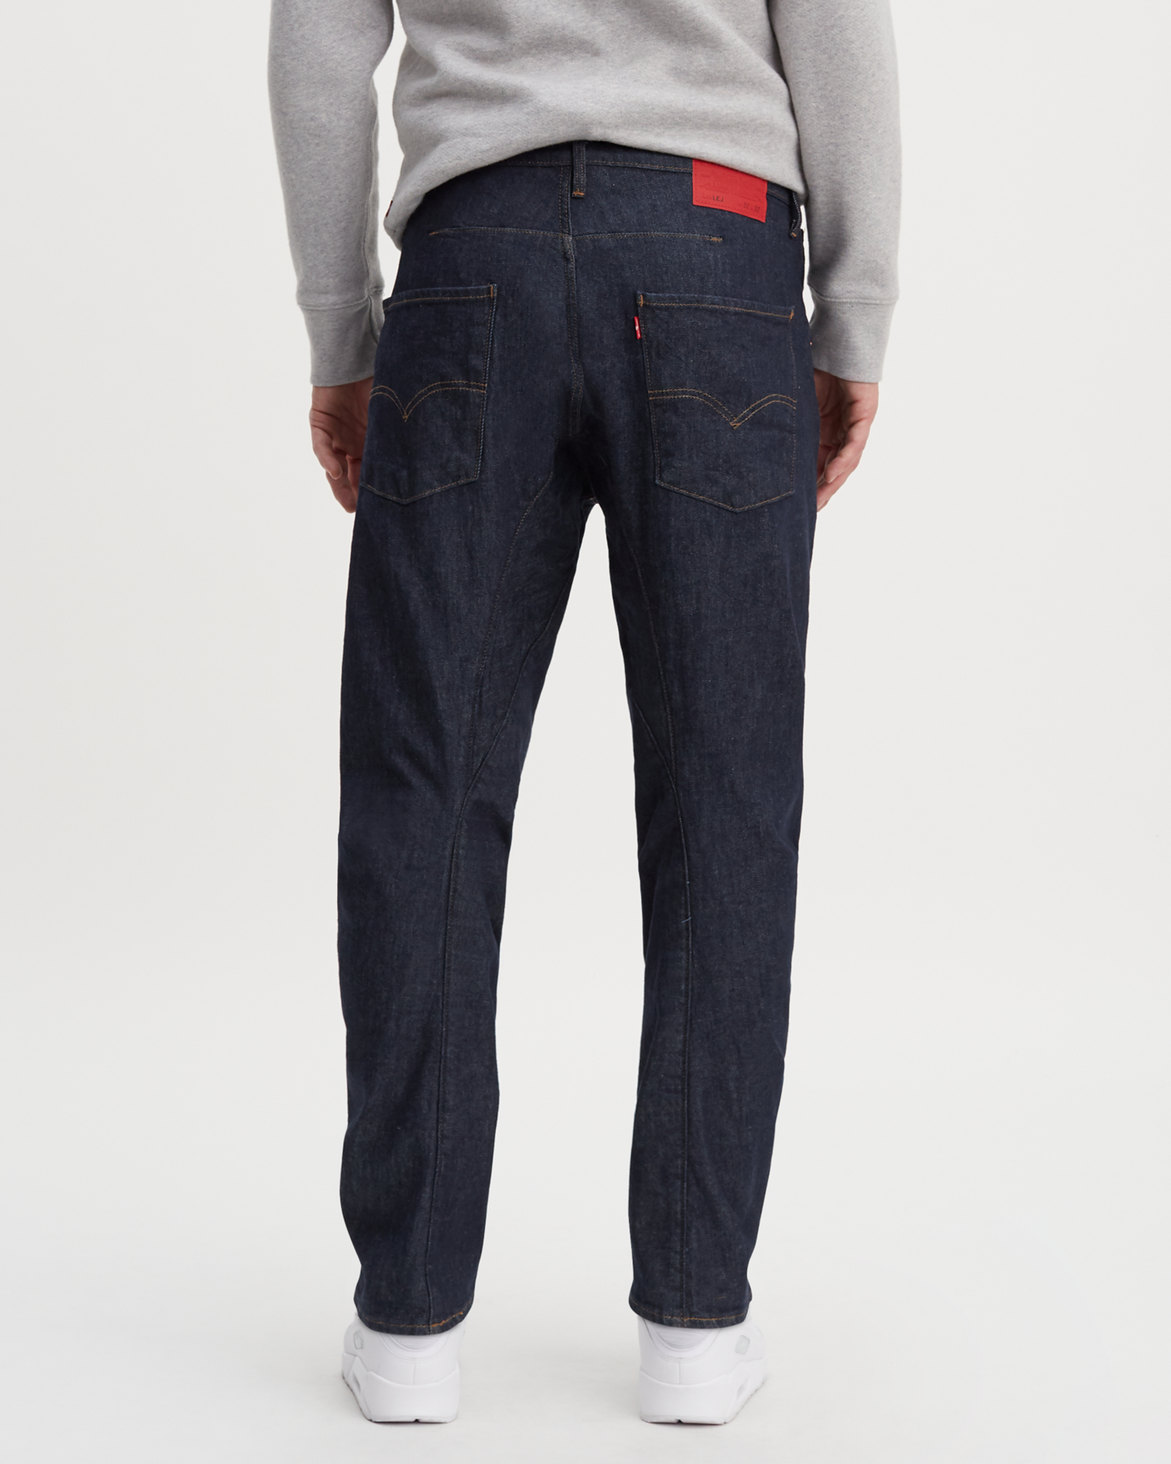 Levi's Engineered Jeans 541 Athlethic Taper Fit | Levi